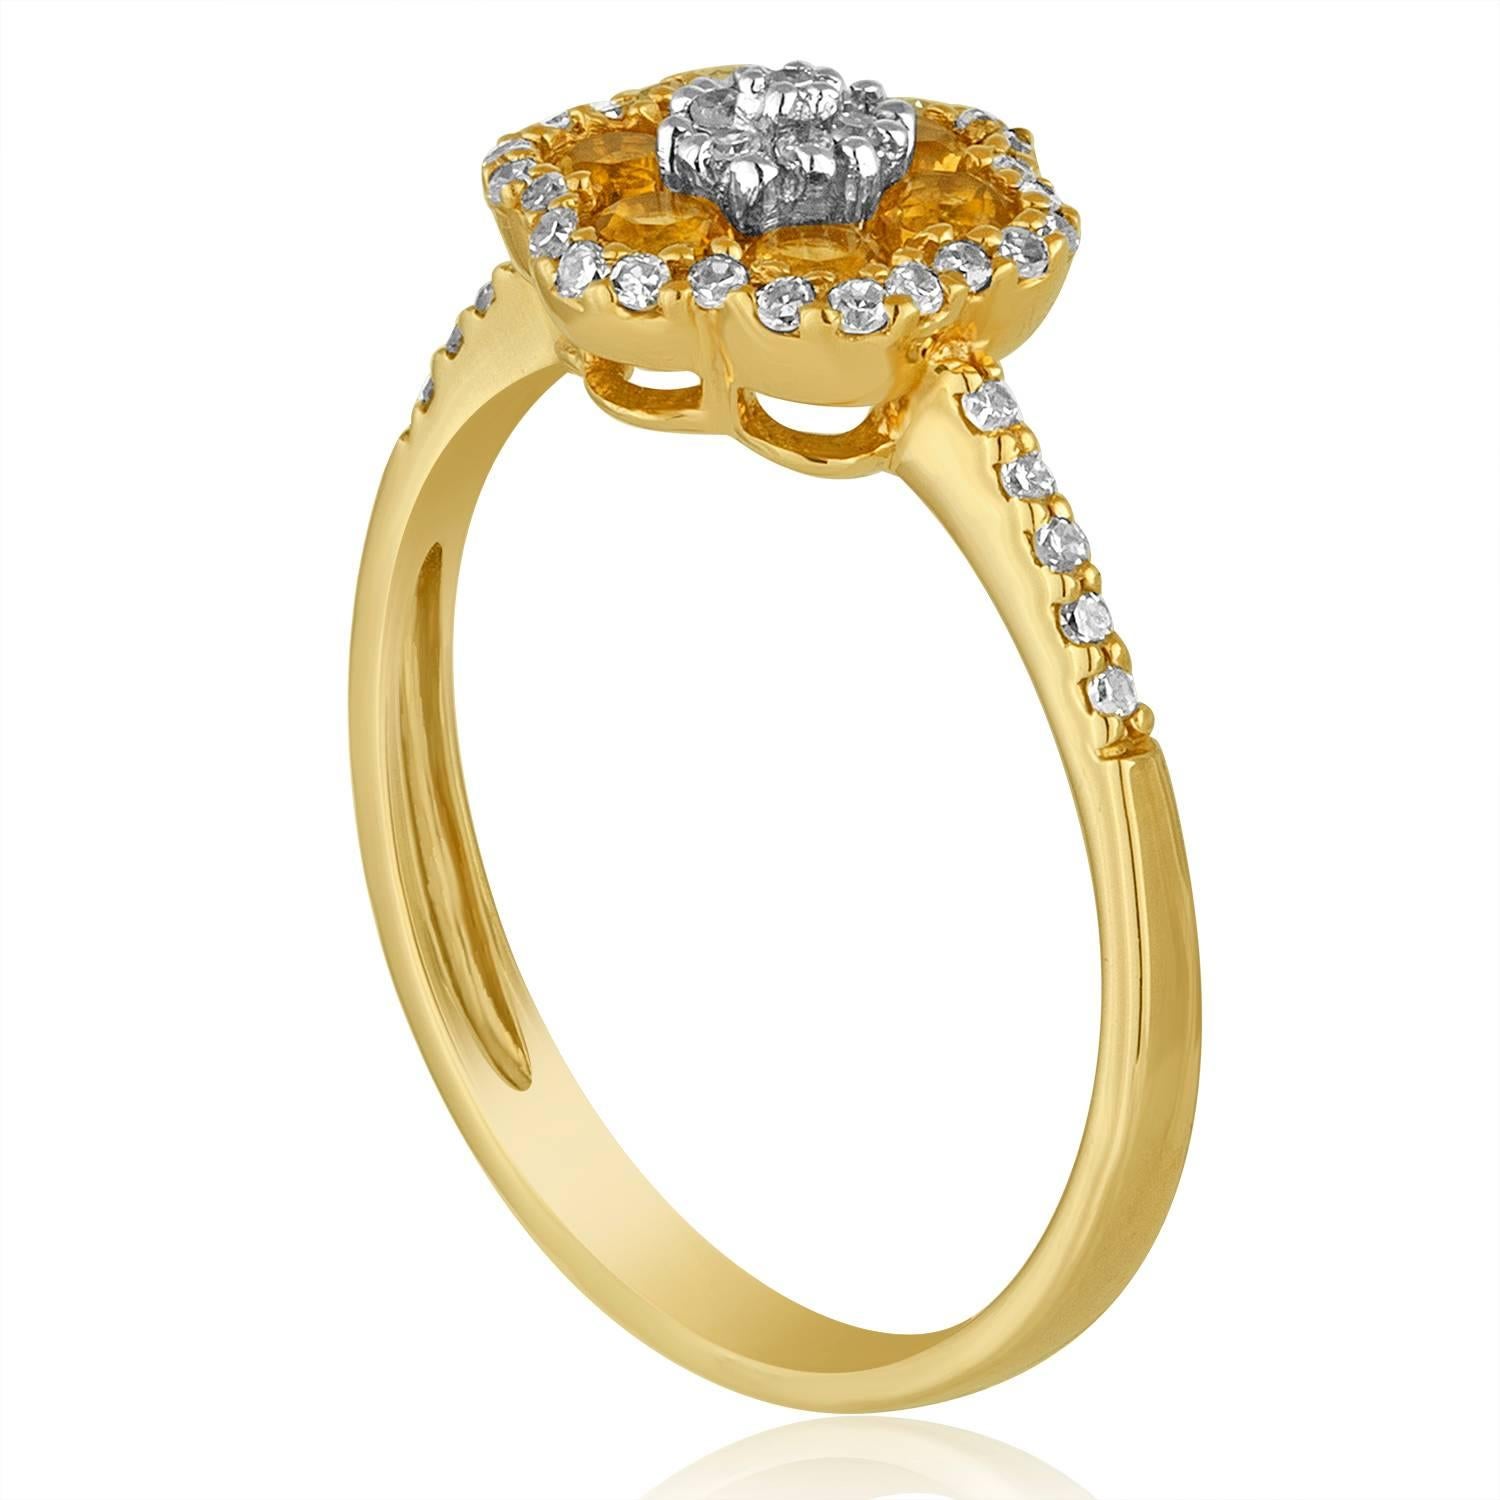 Delicate Flower Ring
The ring is 14K Yellow Gold
There are 0.18 Carats In Diamonds G/H SI
There are 0.34 Carats in Citrine
The top of the ring measures 6/16